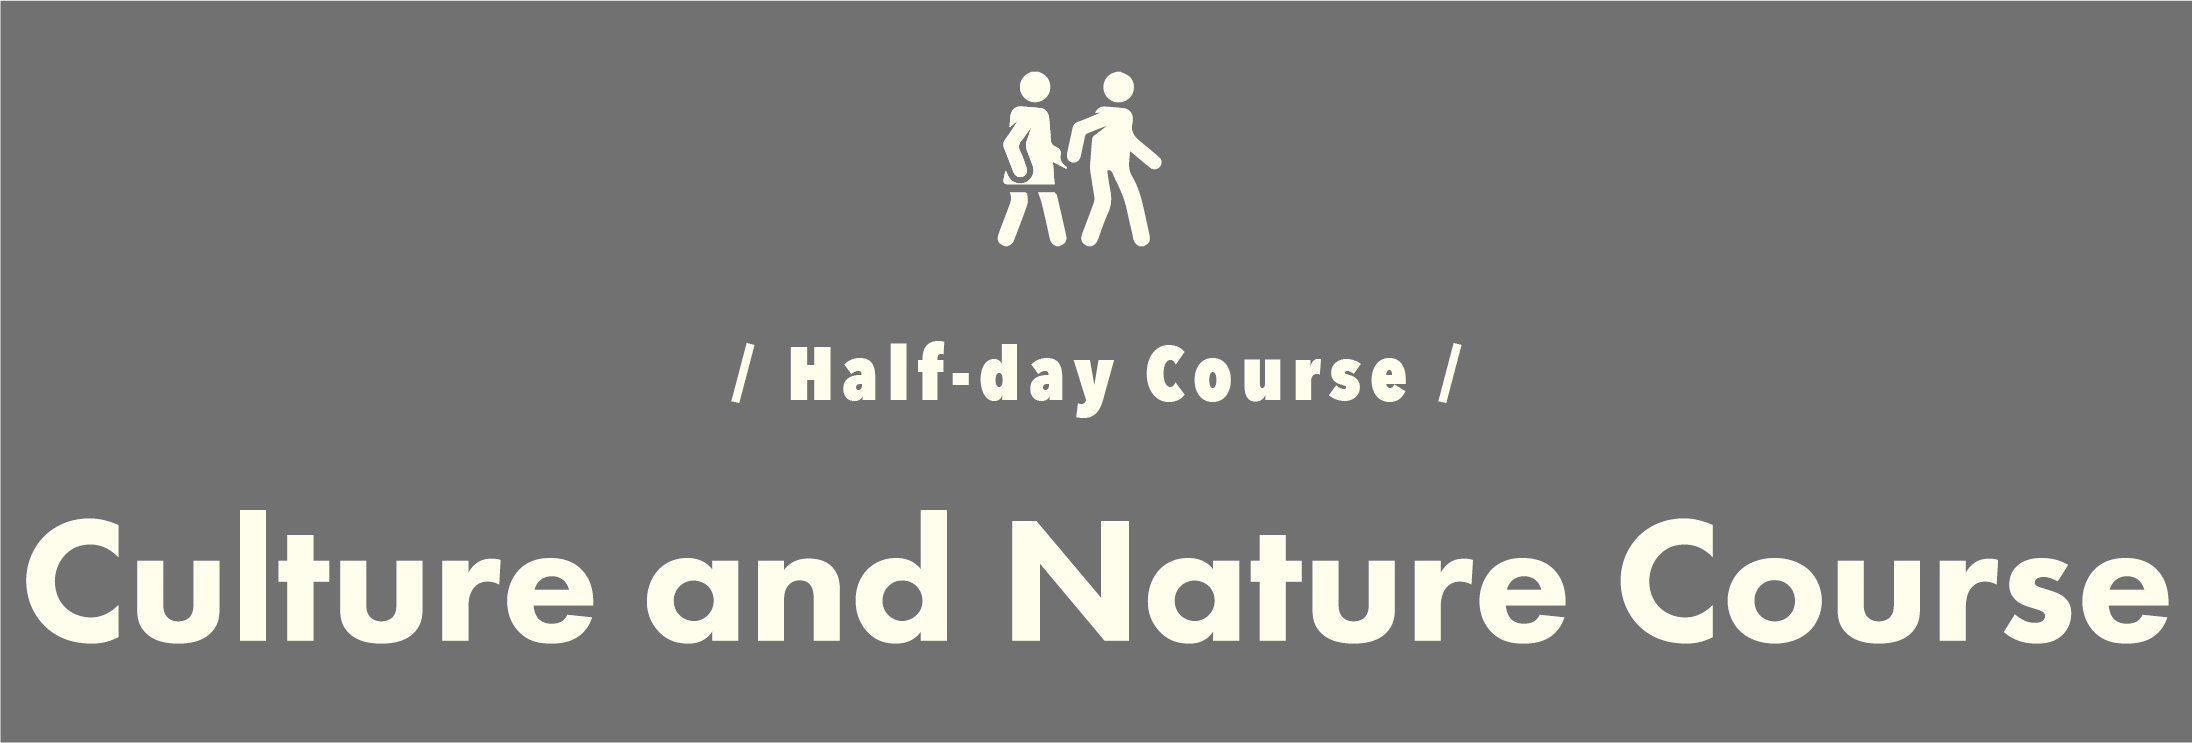 / Half-day Course / Culture and Nature Course